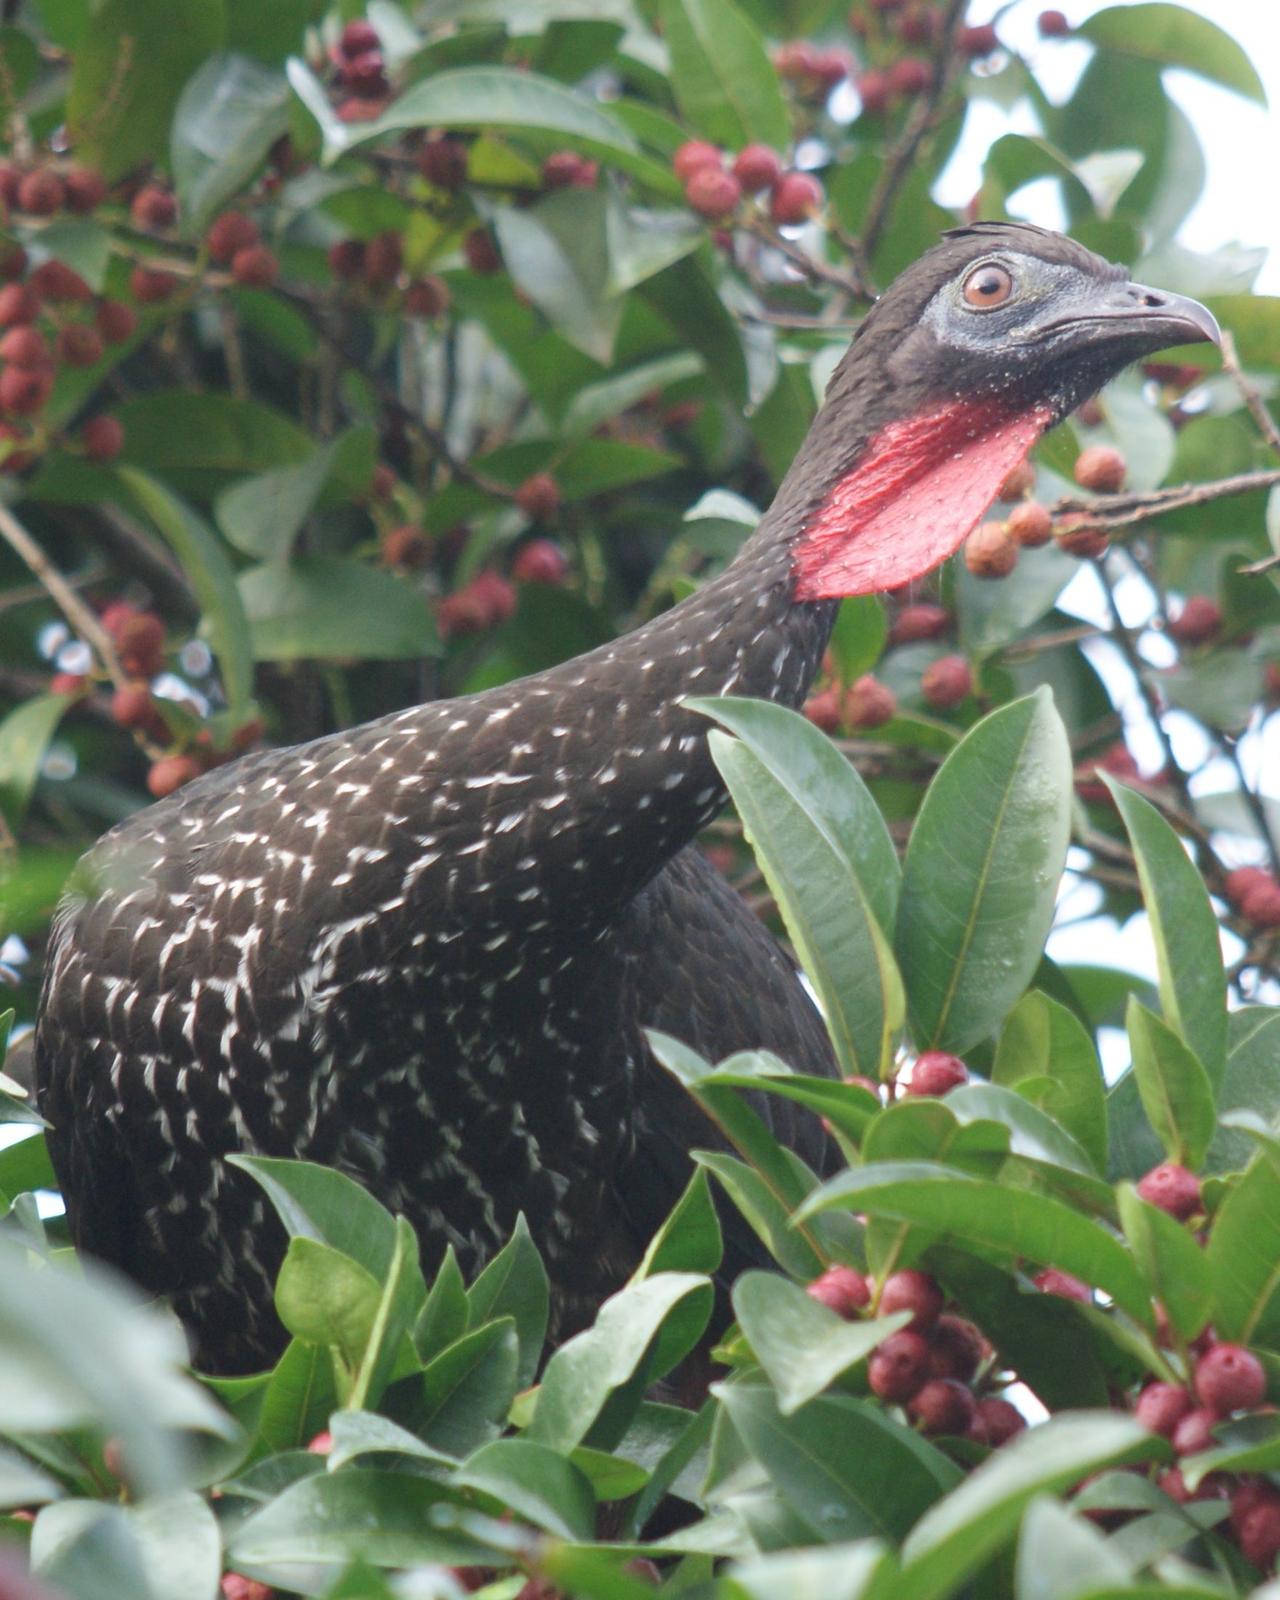 Crested Guan Photo by Robin Oxley